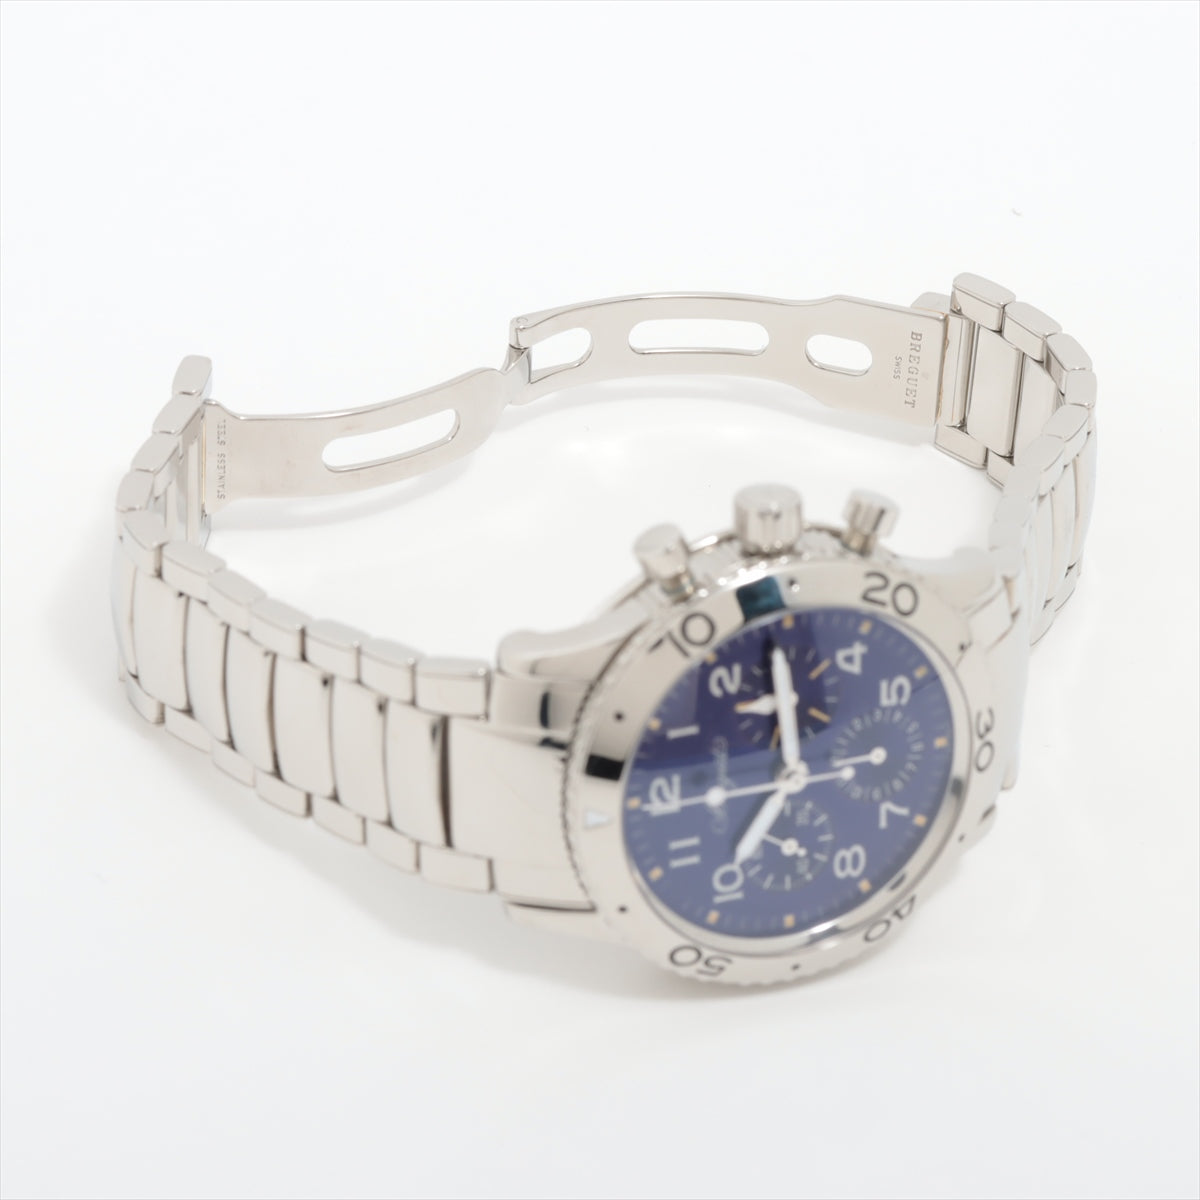 Breguet Aeronavale Limited to 1000 in Japan 3807ST/J2/SW9 SS AT Blue-Face Extra-Link3